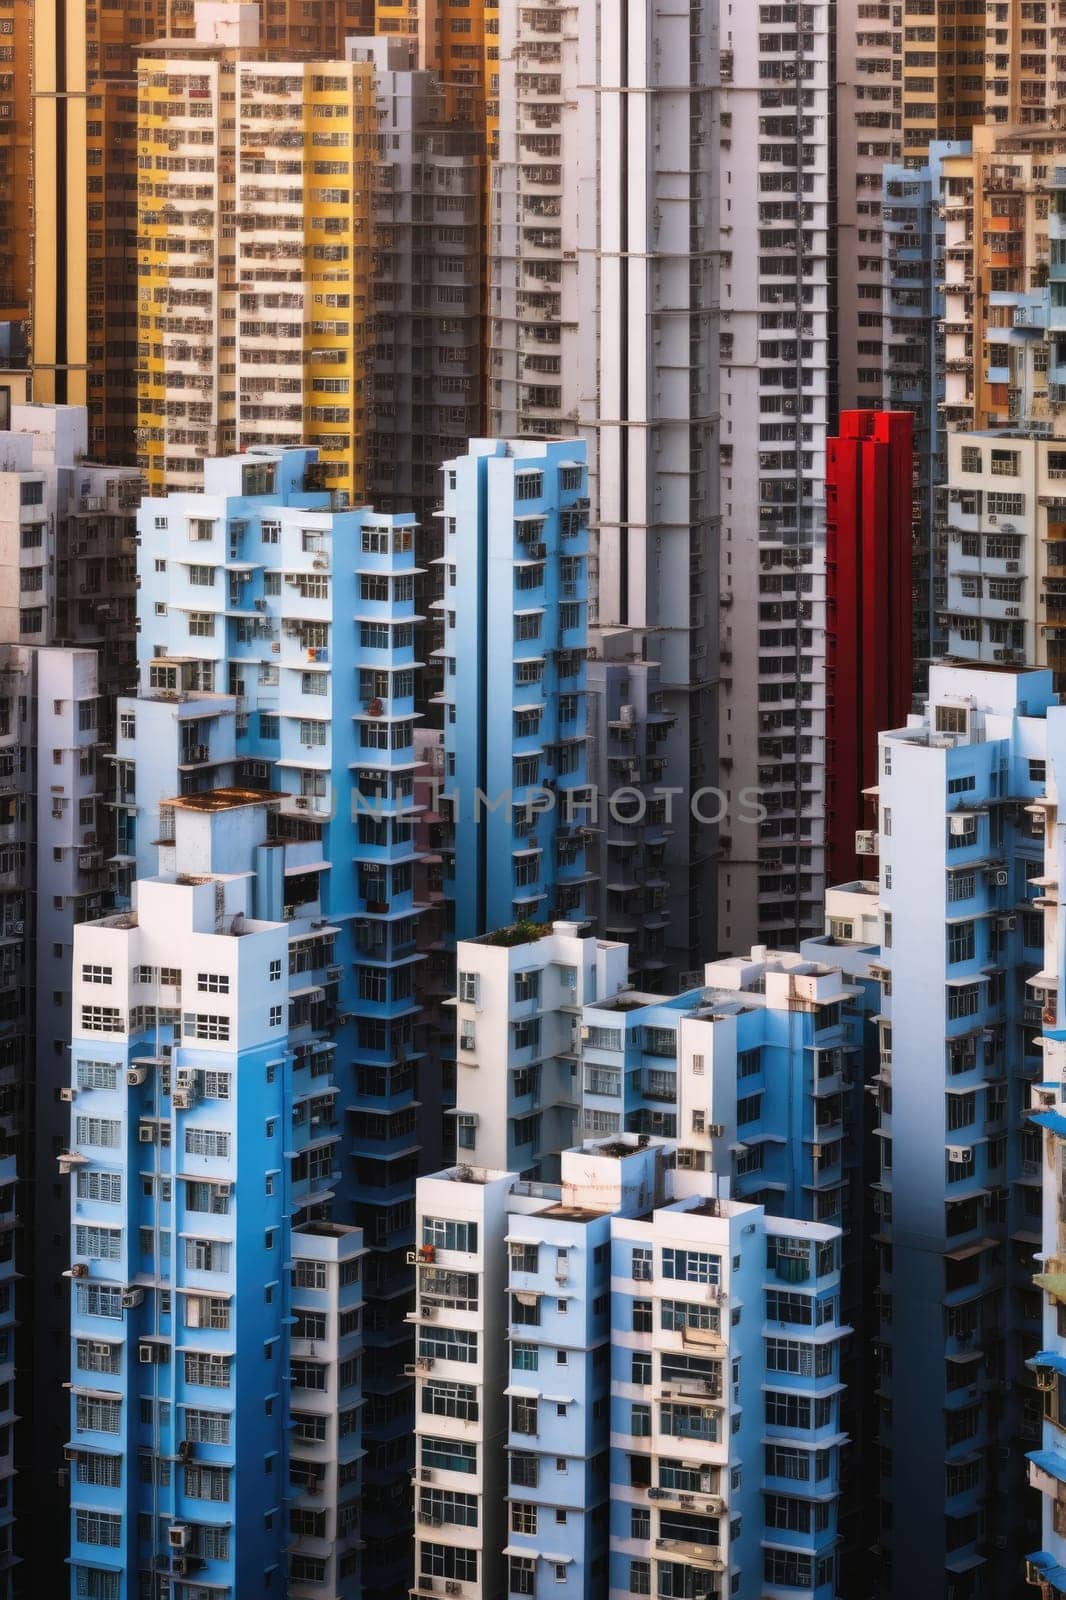 High density residential architecture city buildings comeliness by biancoblue